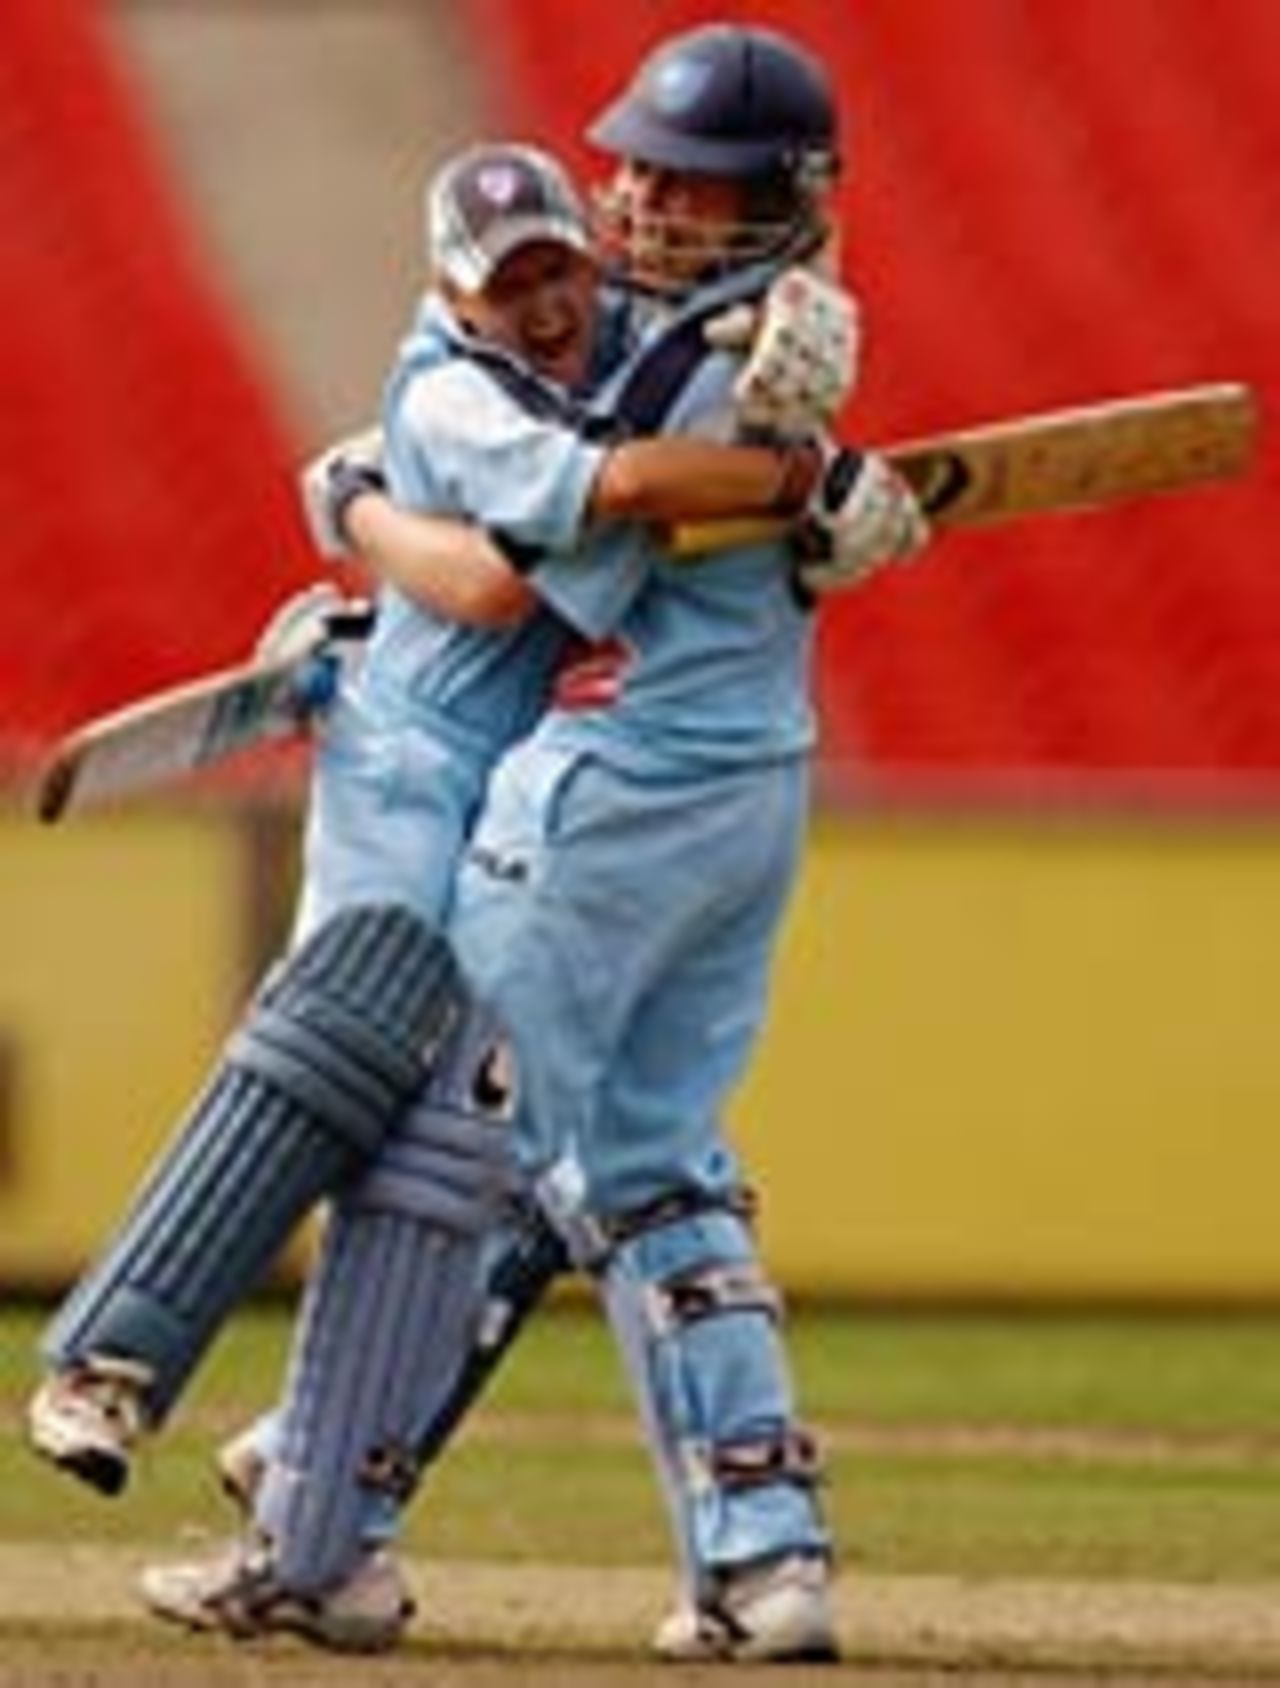 Leonie Coleman and Alex Blackwell of New South Wales celebrate hitting the winning runs to defeat Victoria in the Womens National Cricket League 3rd Final , Melbourne, February 2, 2004